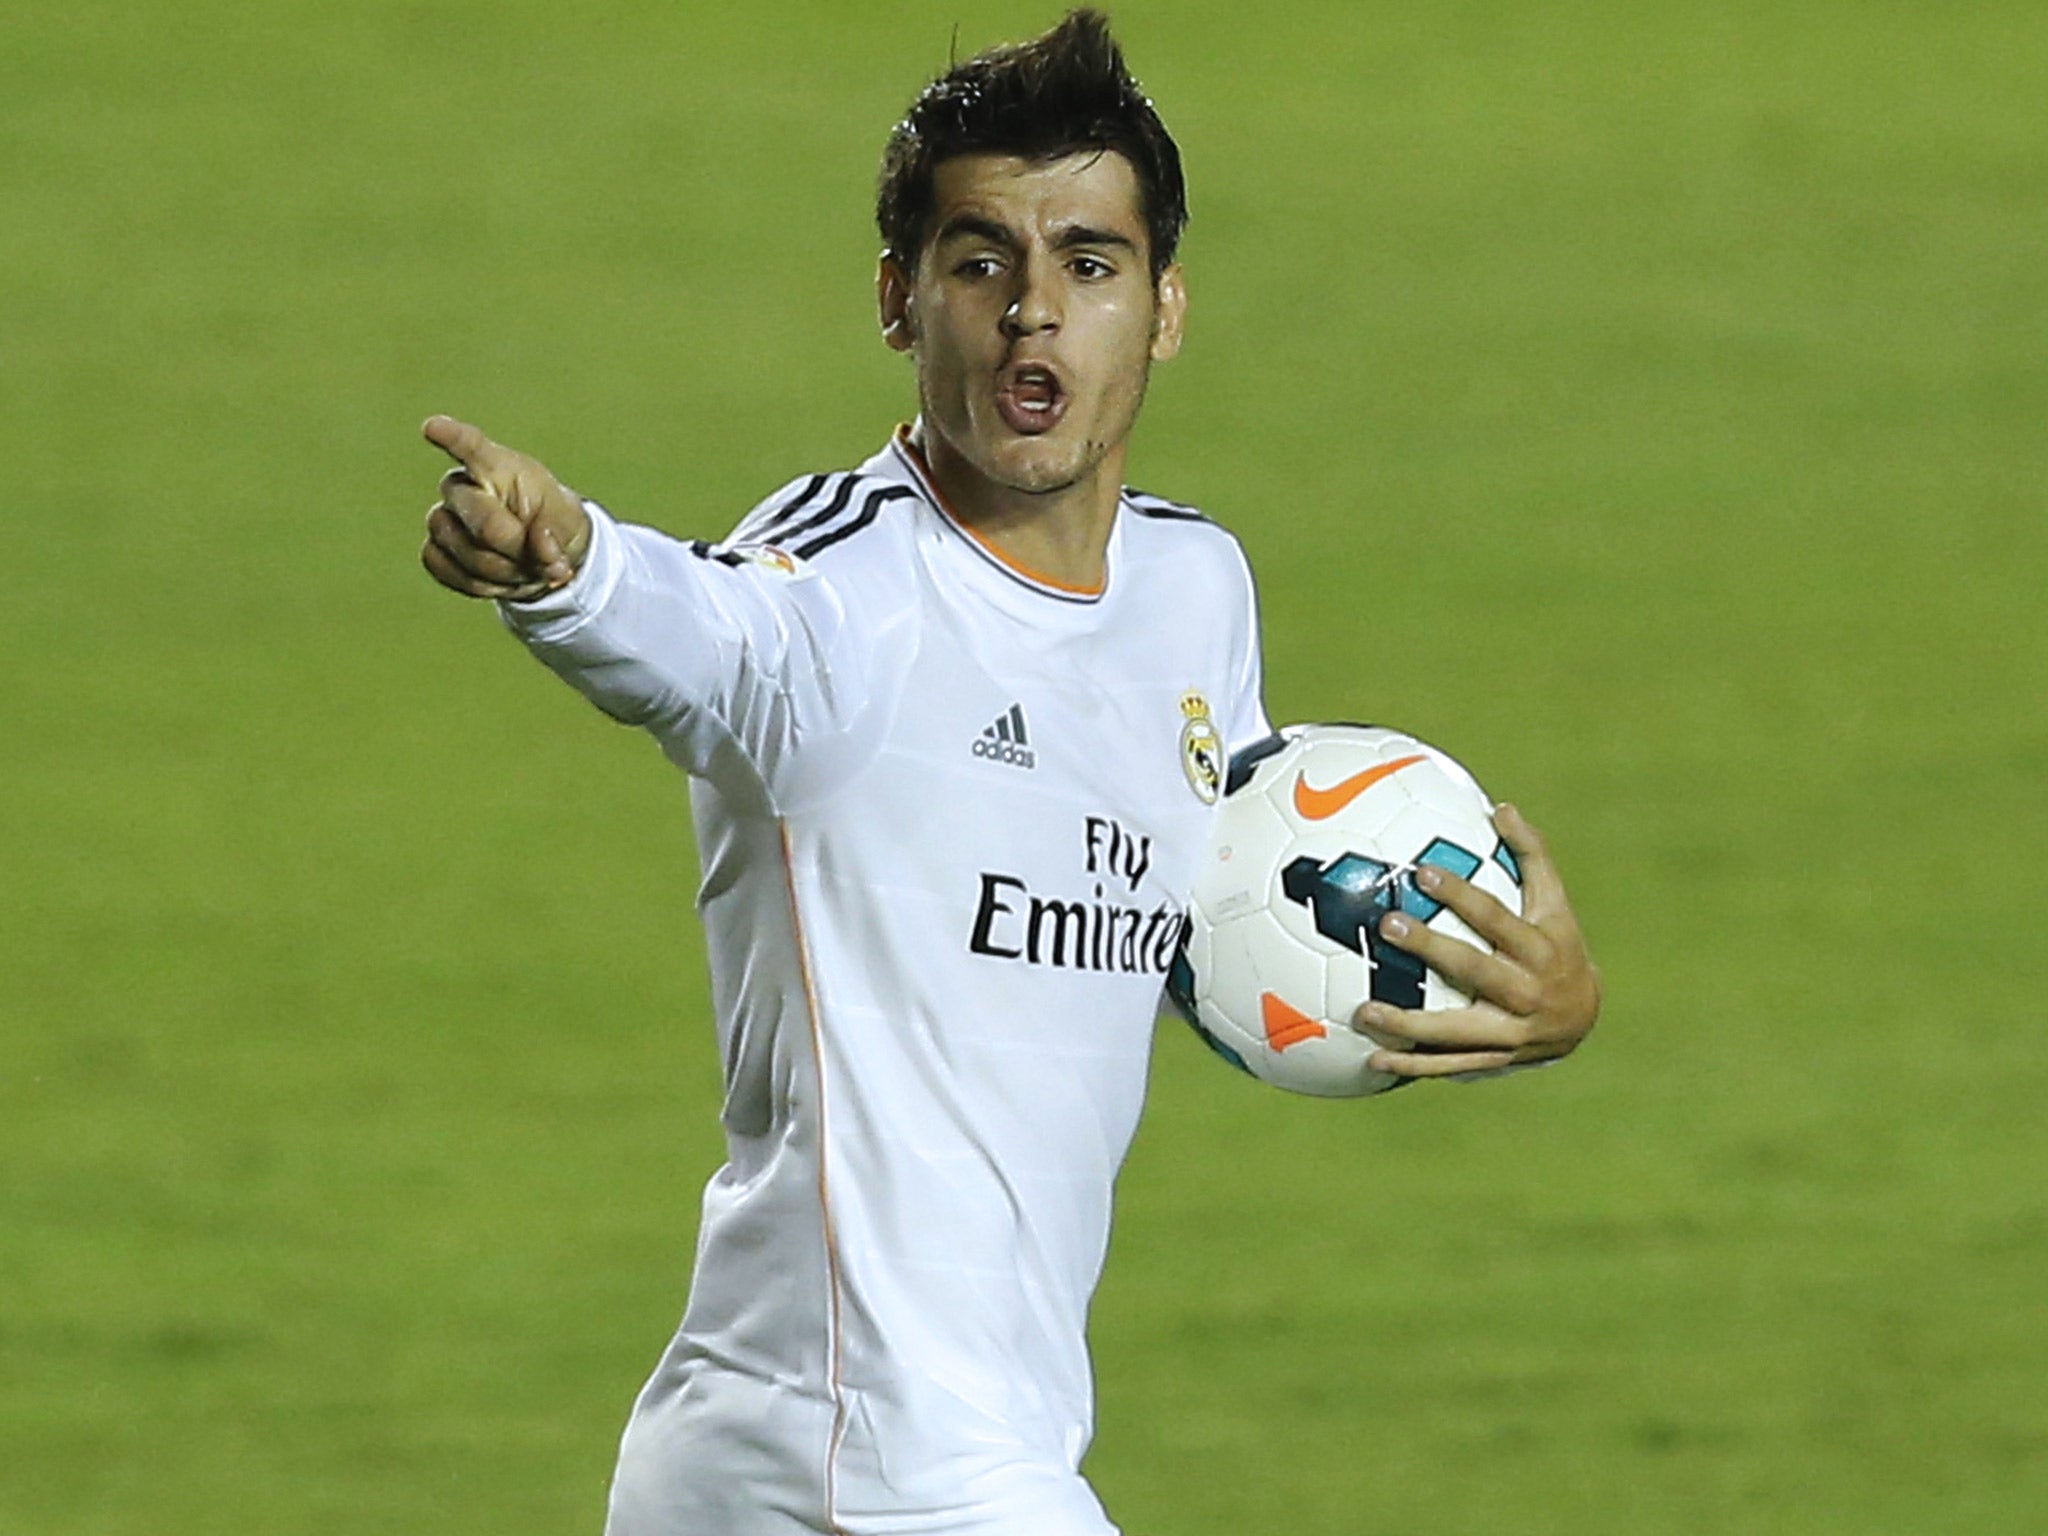 Alvaro Morata’s first-team chances have been limited at Real